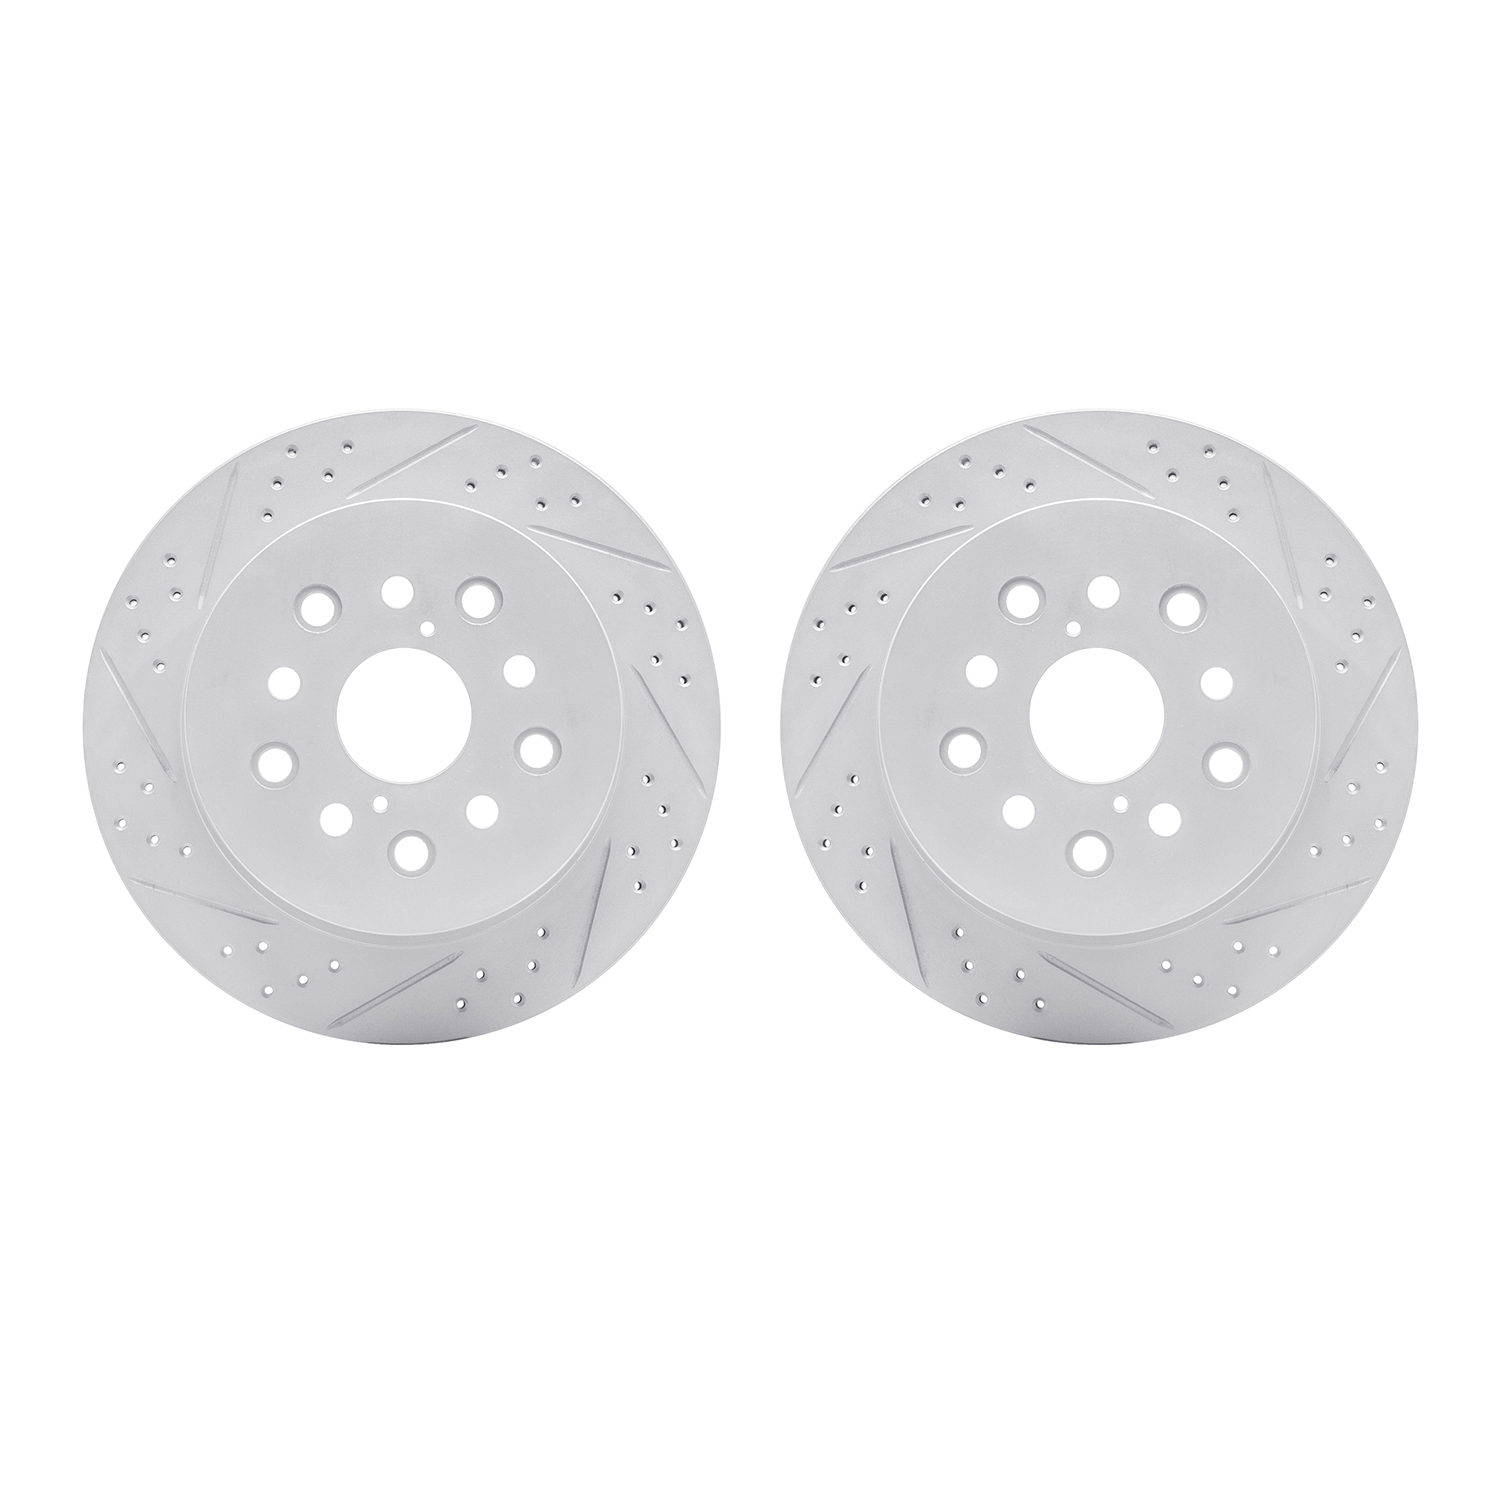 2002-75023 Geoperformance Drilled/Slotted Brake Rotors, 2001-2006 Lexus/Toyota/Scion, Position: Rear